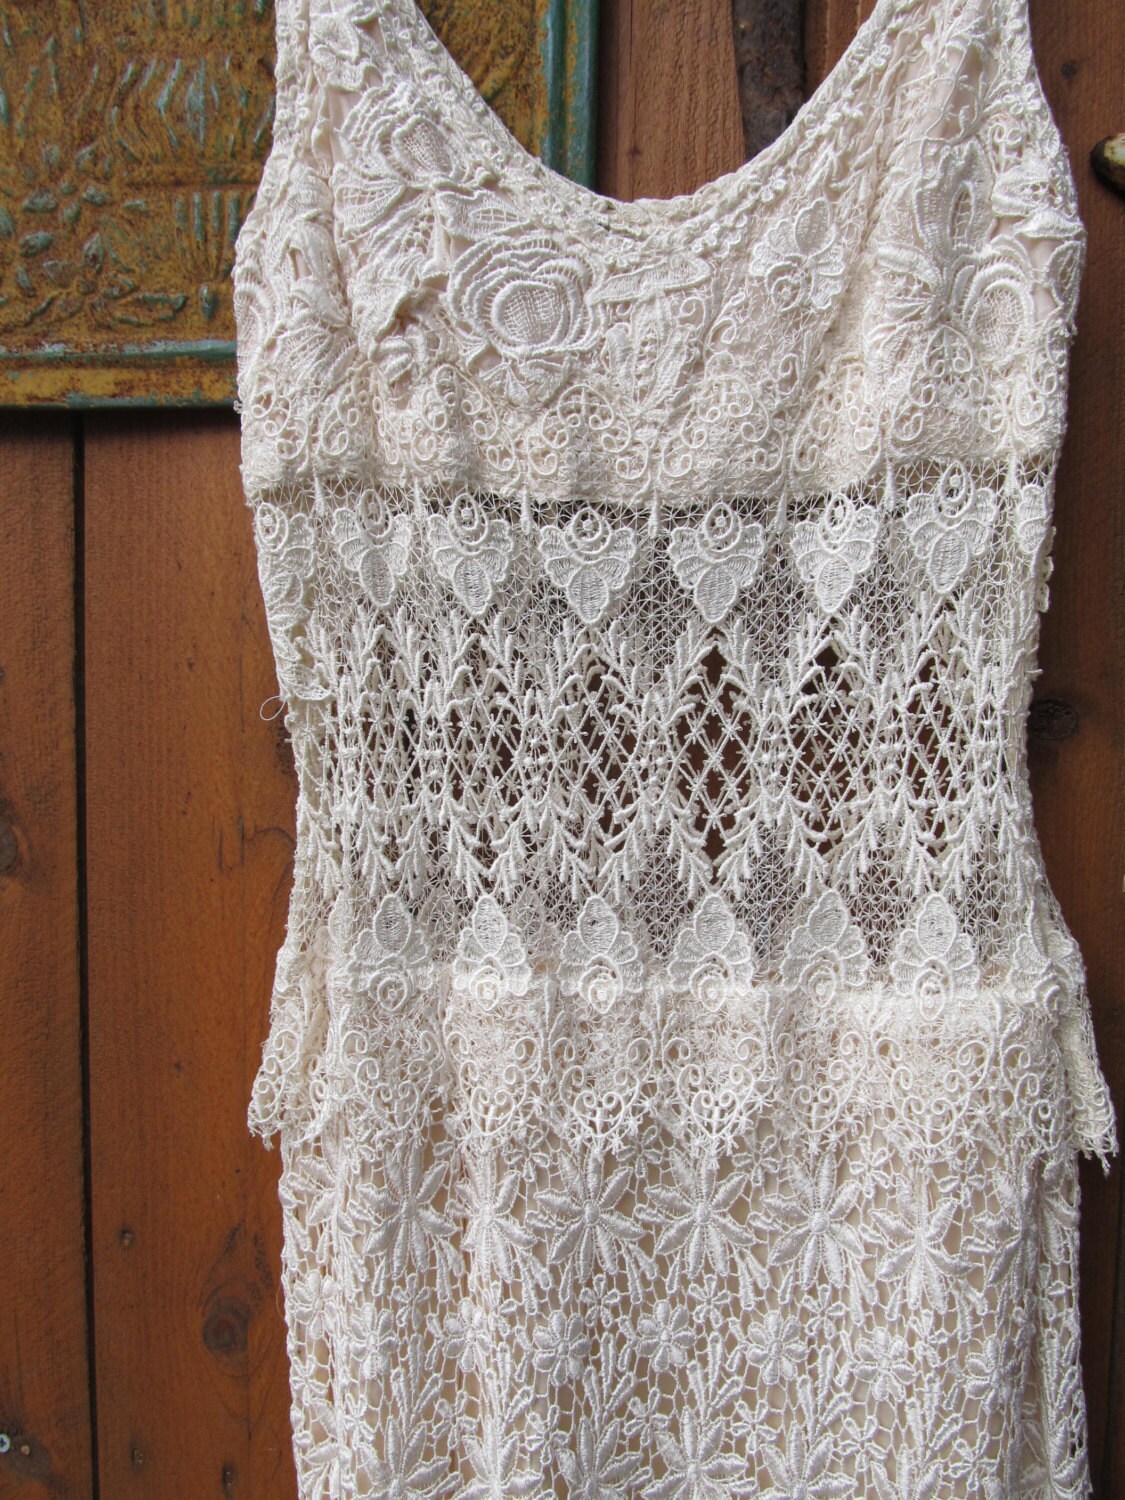 Gorgeous New Dress Made Out of Venice Allover Lace vintage - Etsy